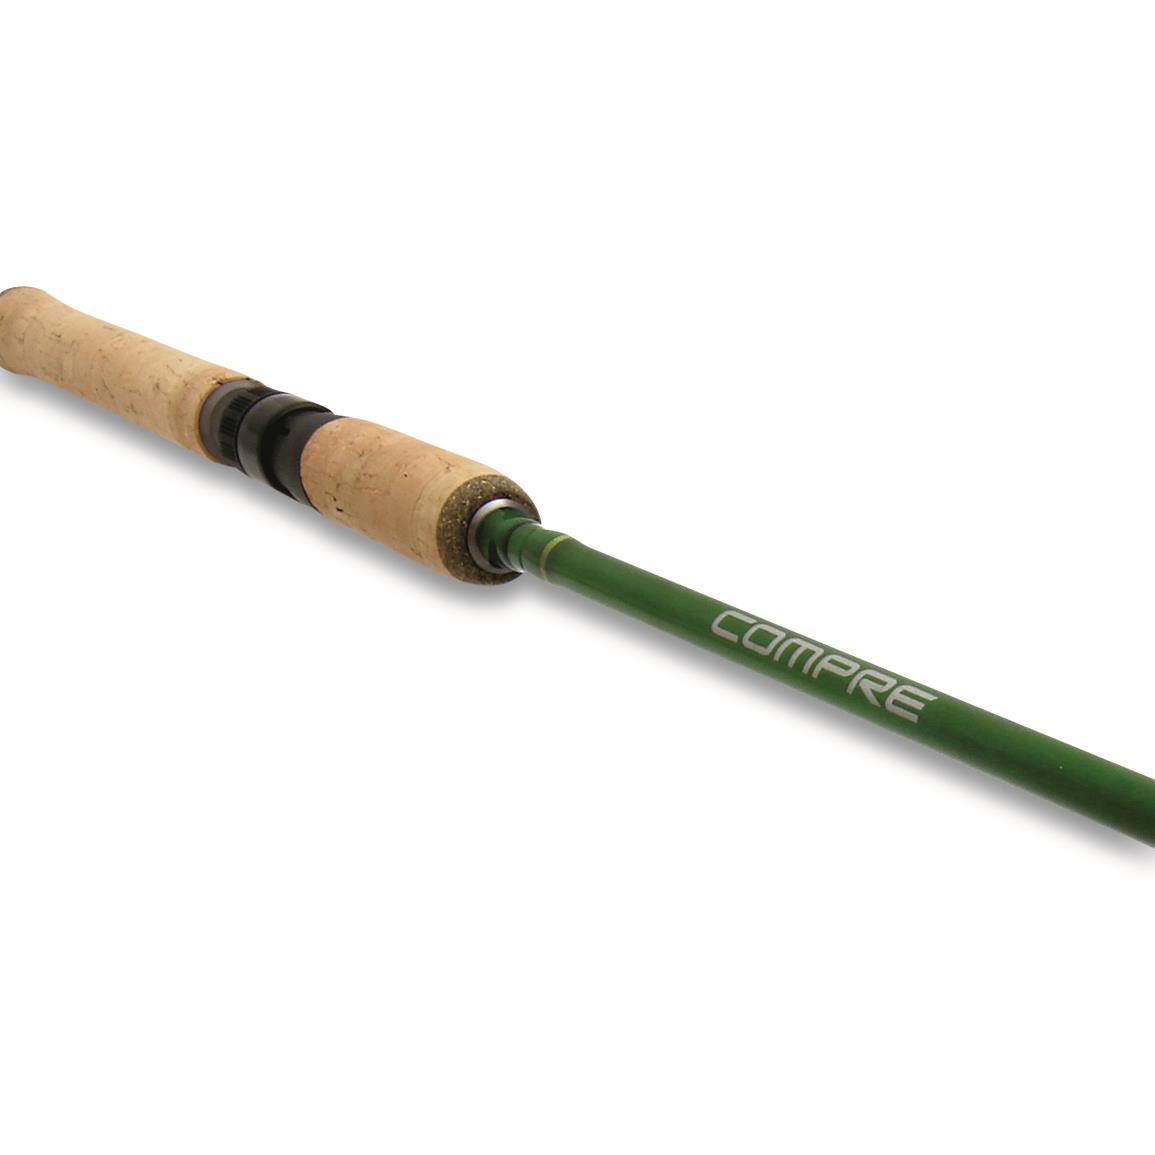 Shimano Compre Walleye Spinning Rod, 6'6" Length, Medium Power, Extra Fast Action